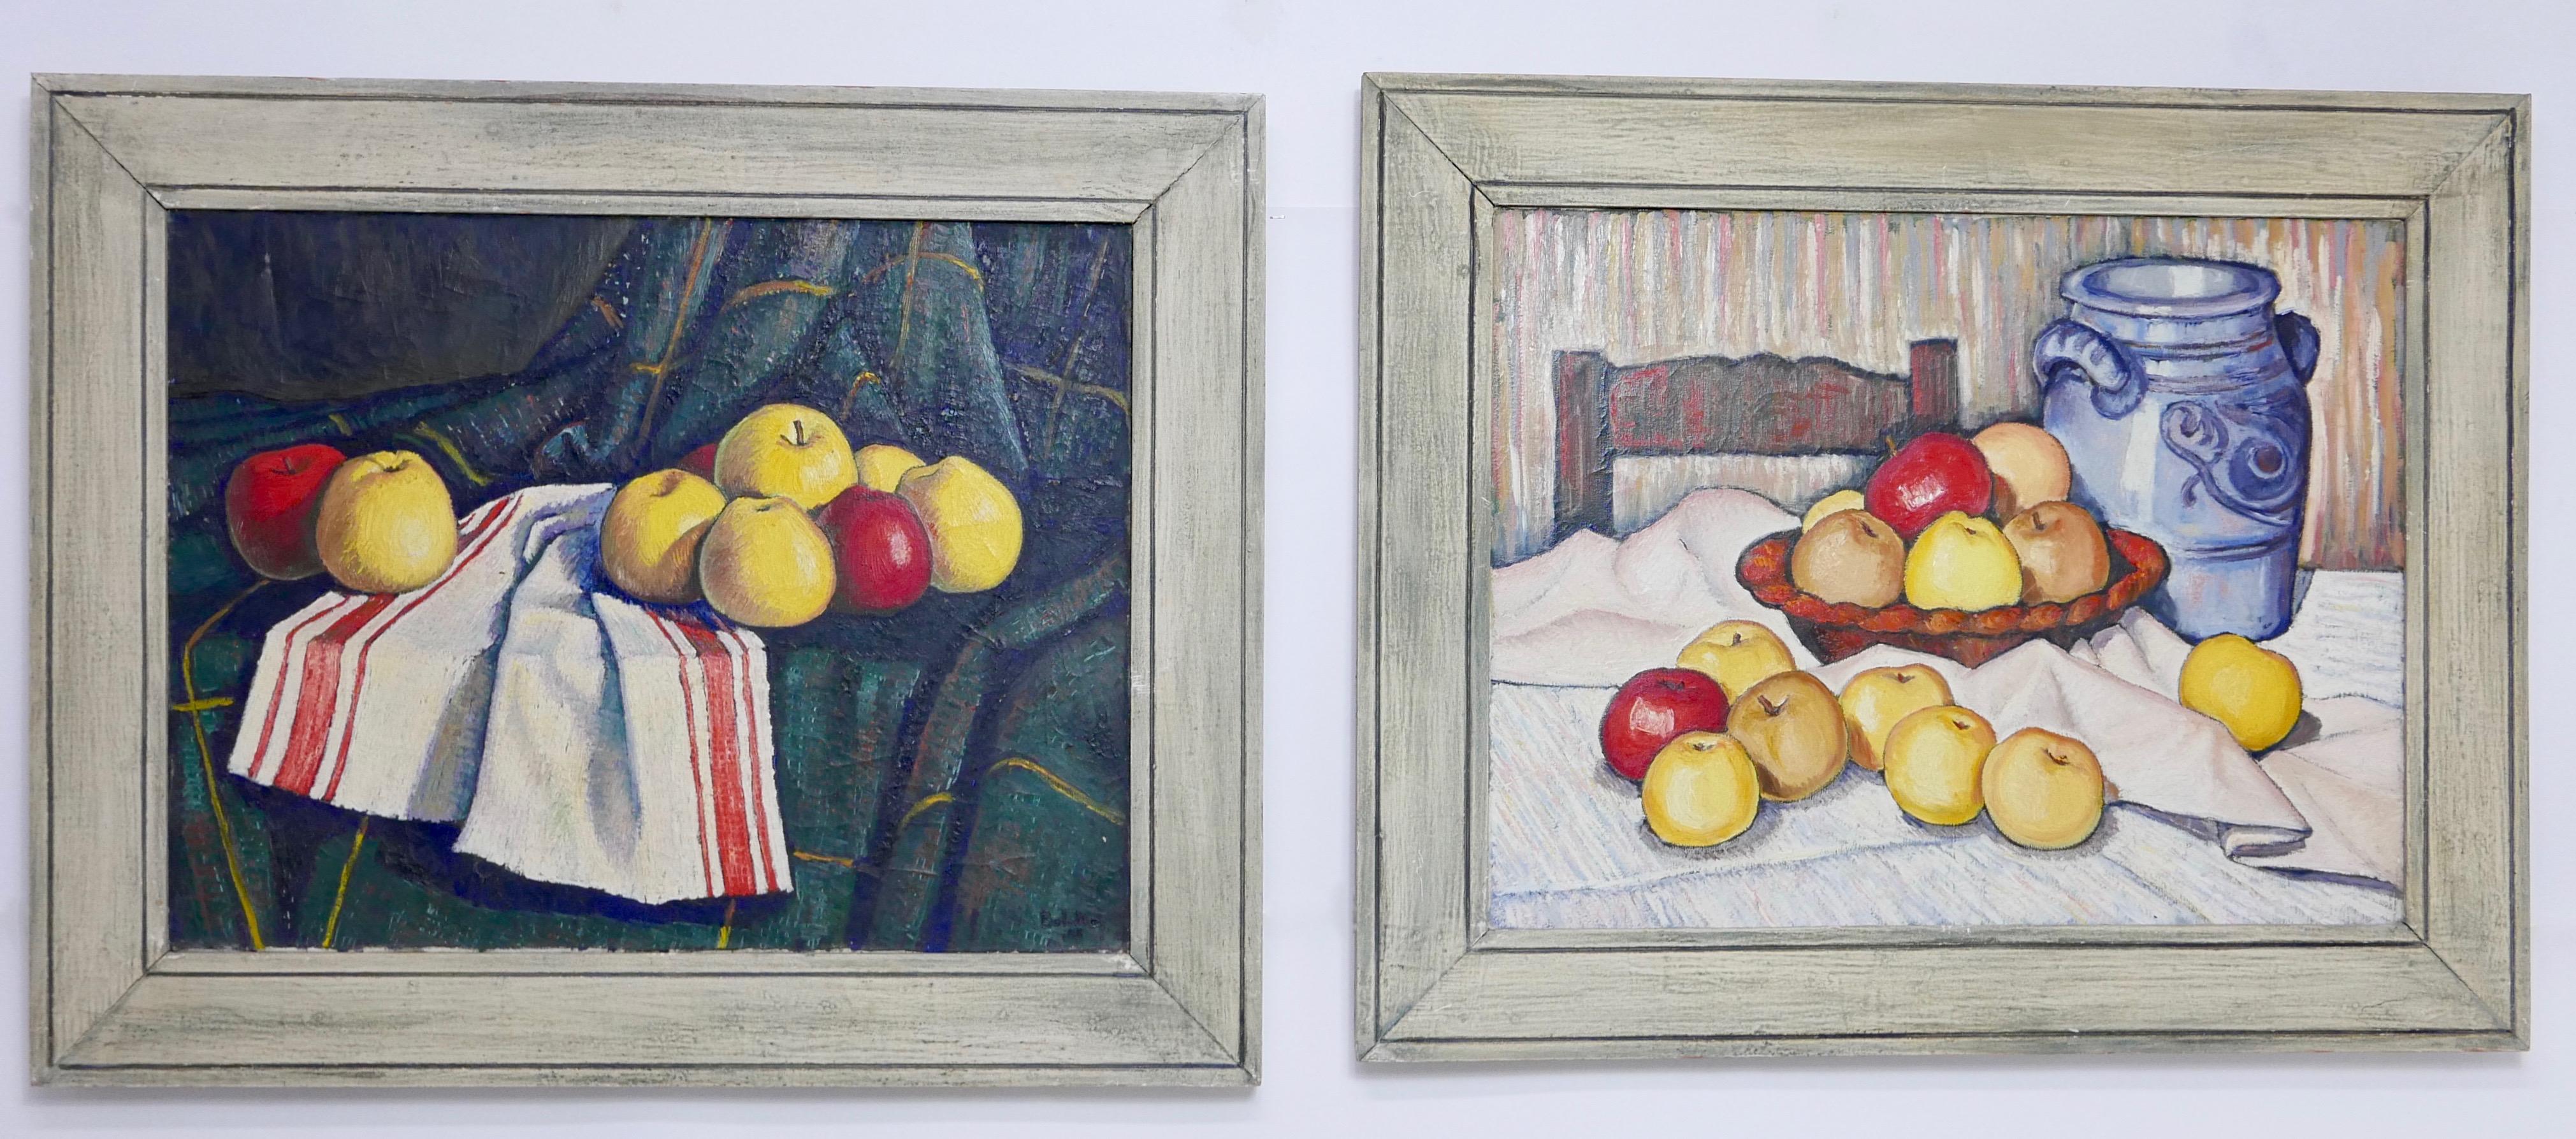 Hand-Painted Pair of Mid-20th Century Still Life Paintings of Fruit Signed Bolomey, 1948 For Sale